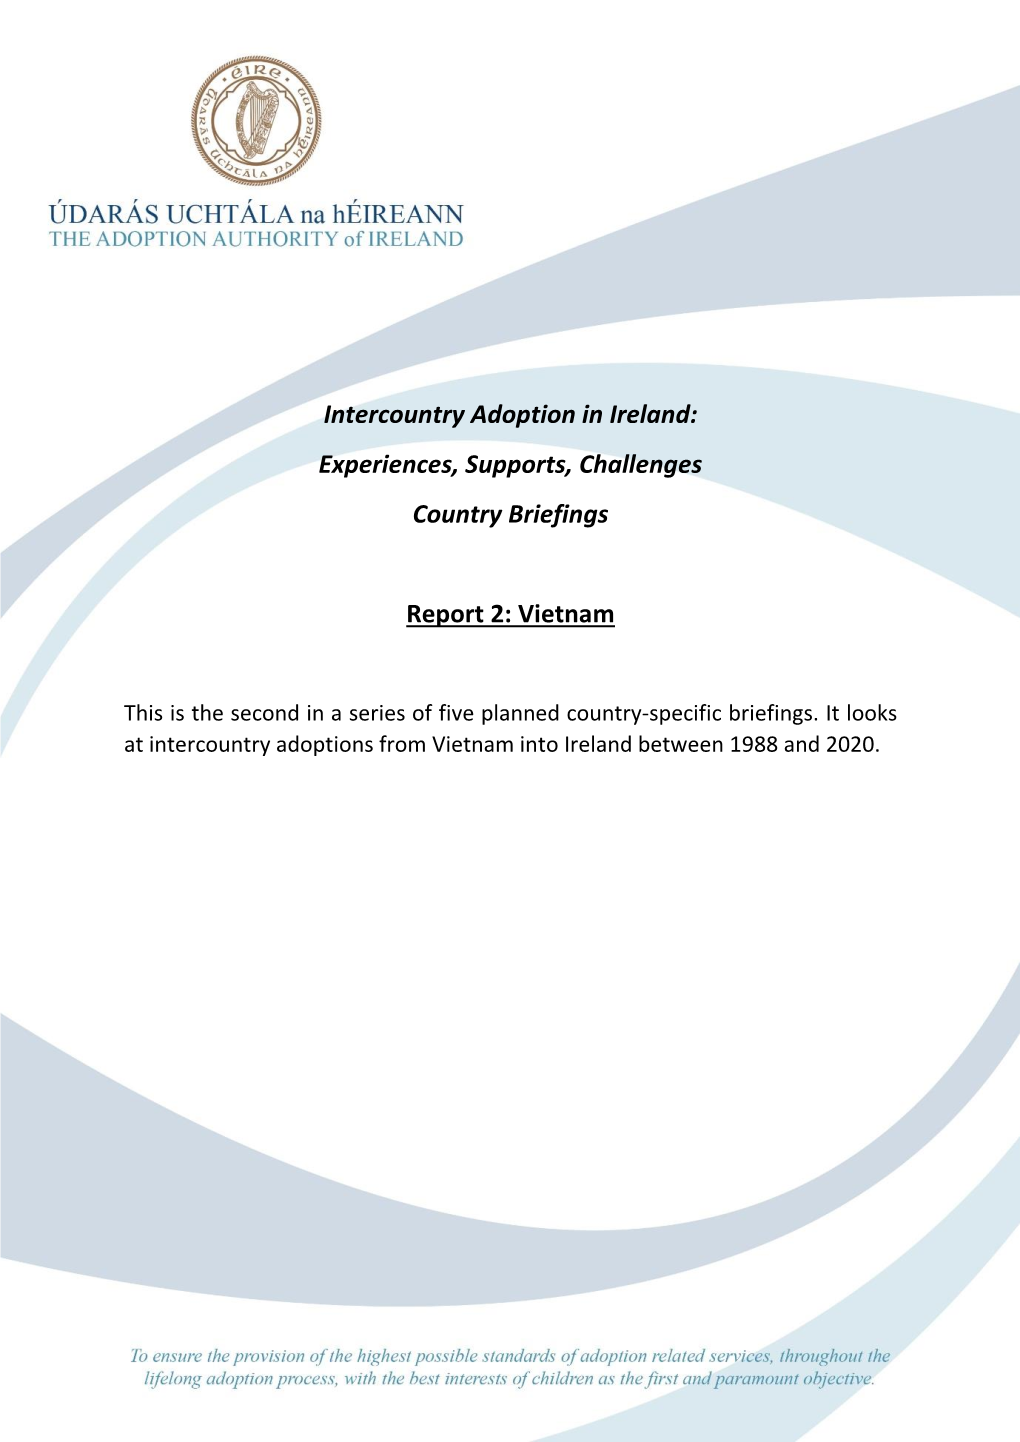 Intercountry Adoption in Ireland: Experiences, Supports, Challenges Country Briefings Report 2: Vietnam